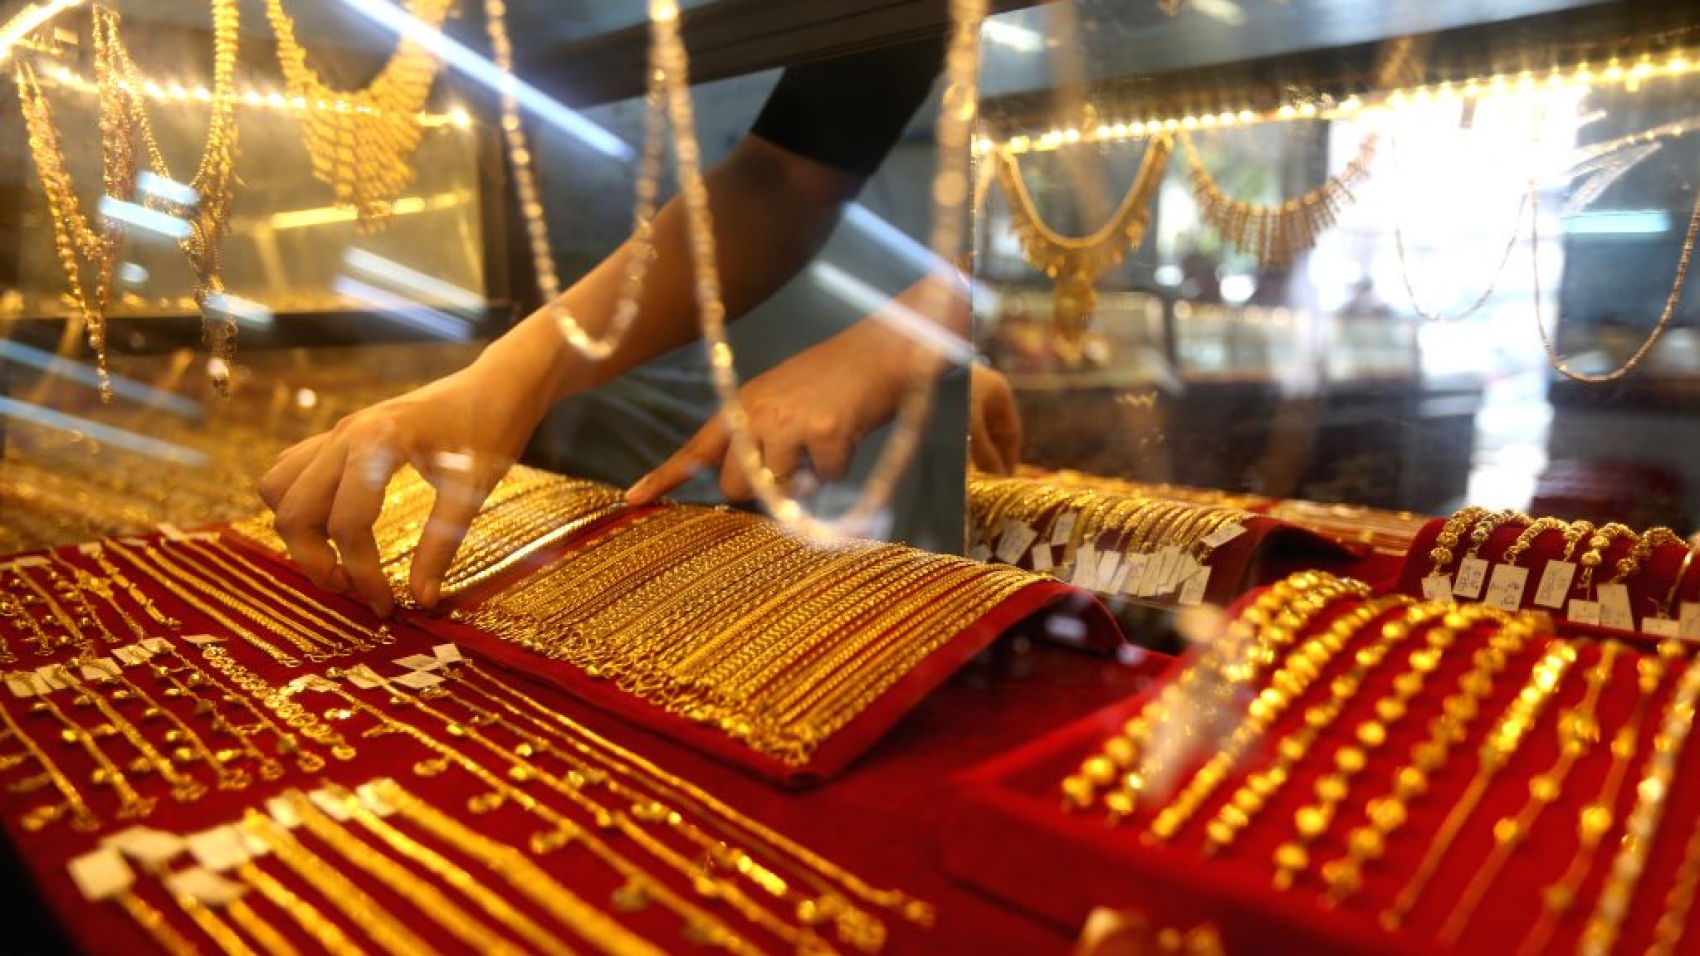 yangon-sept-6-2019-gold-products-are-displayed-at-892886